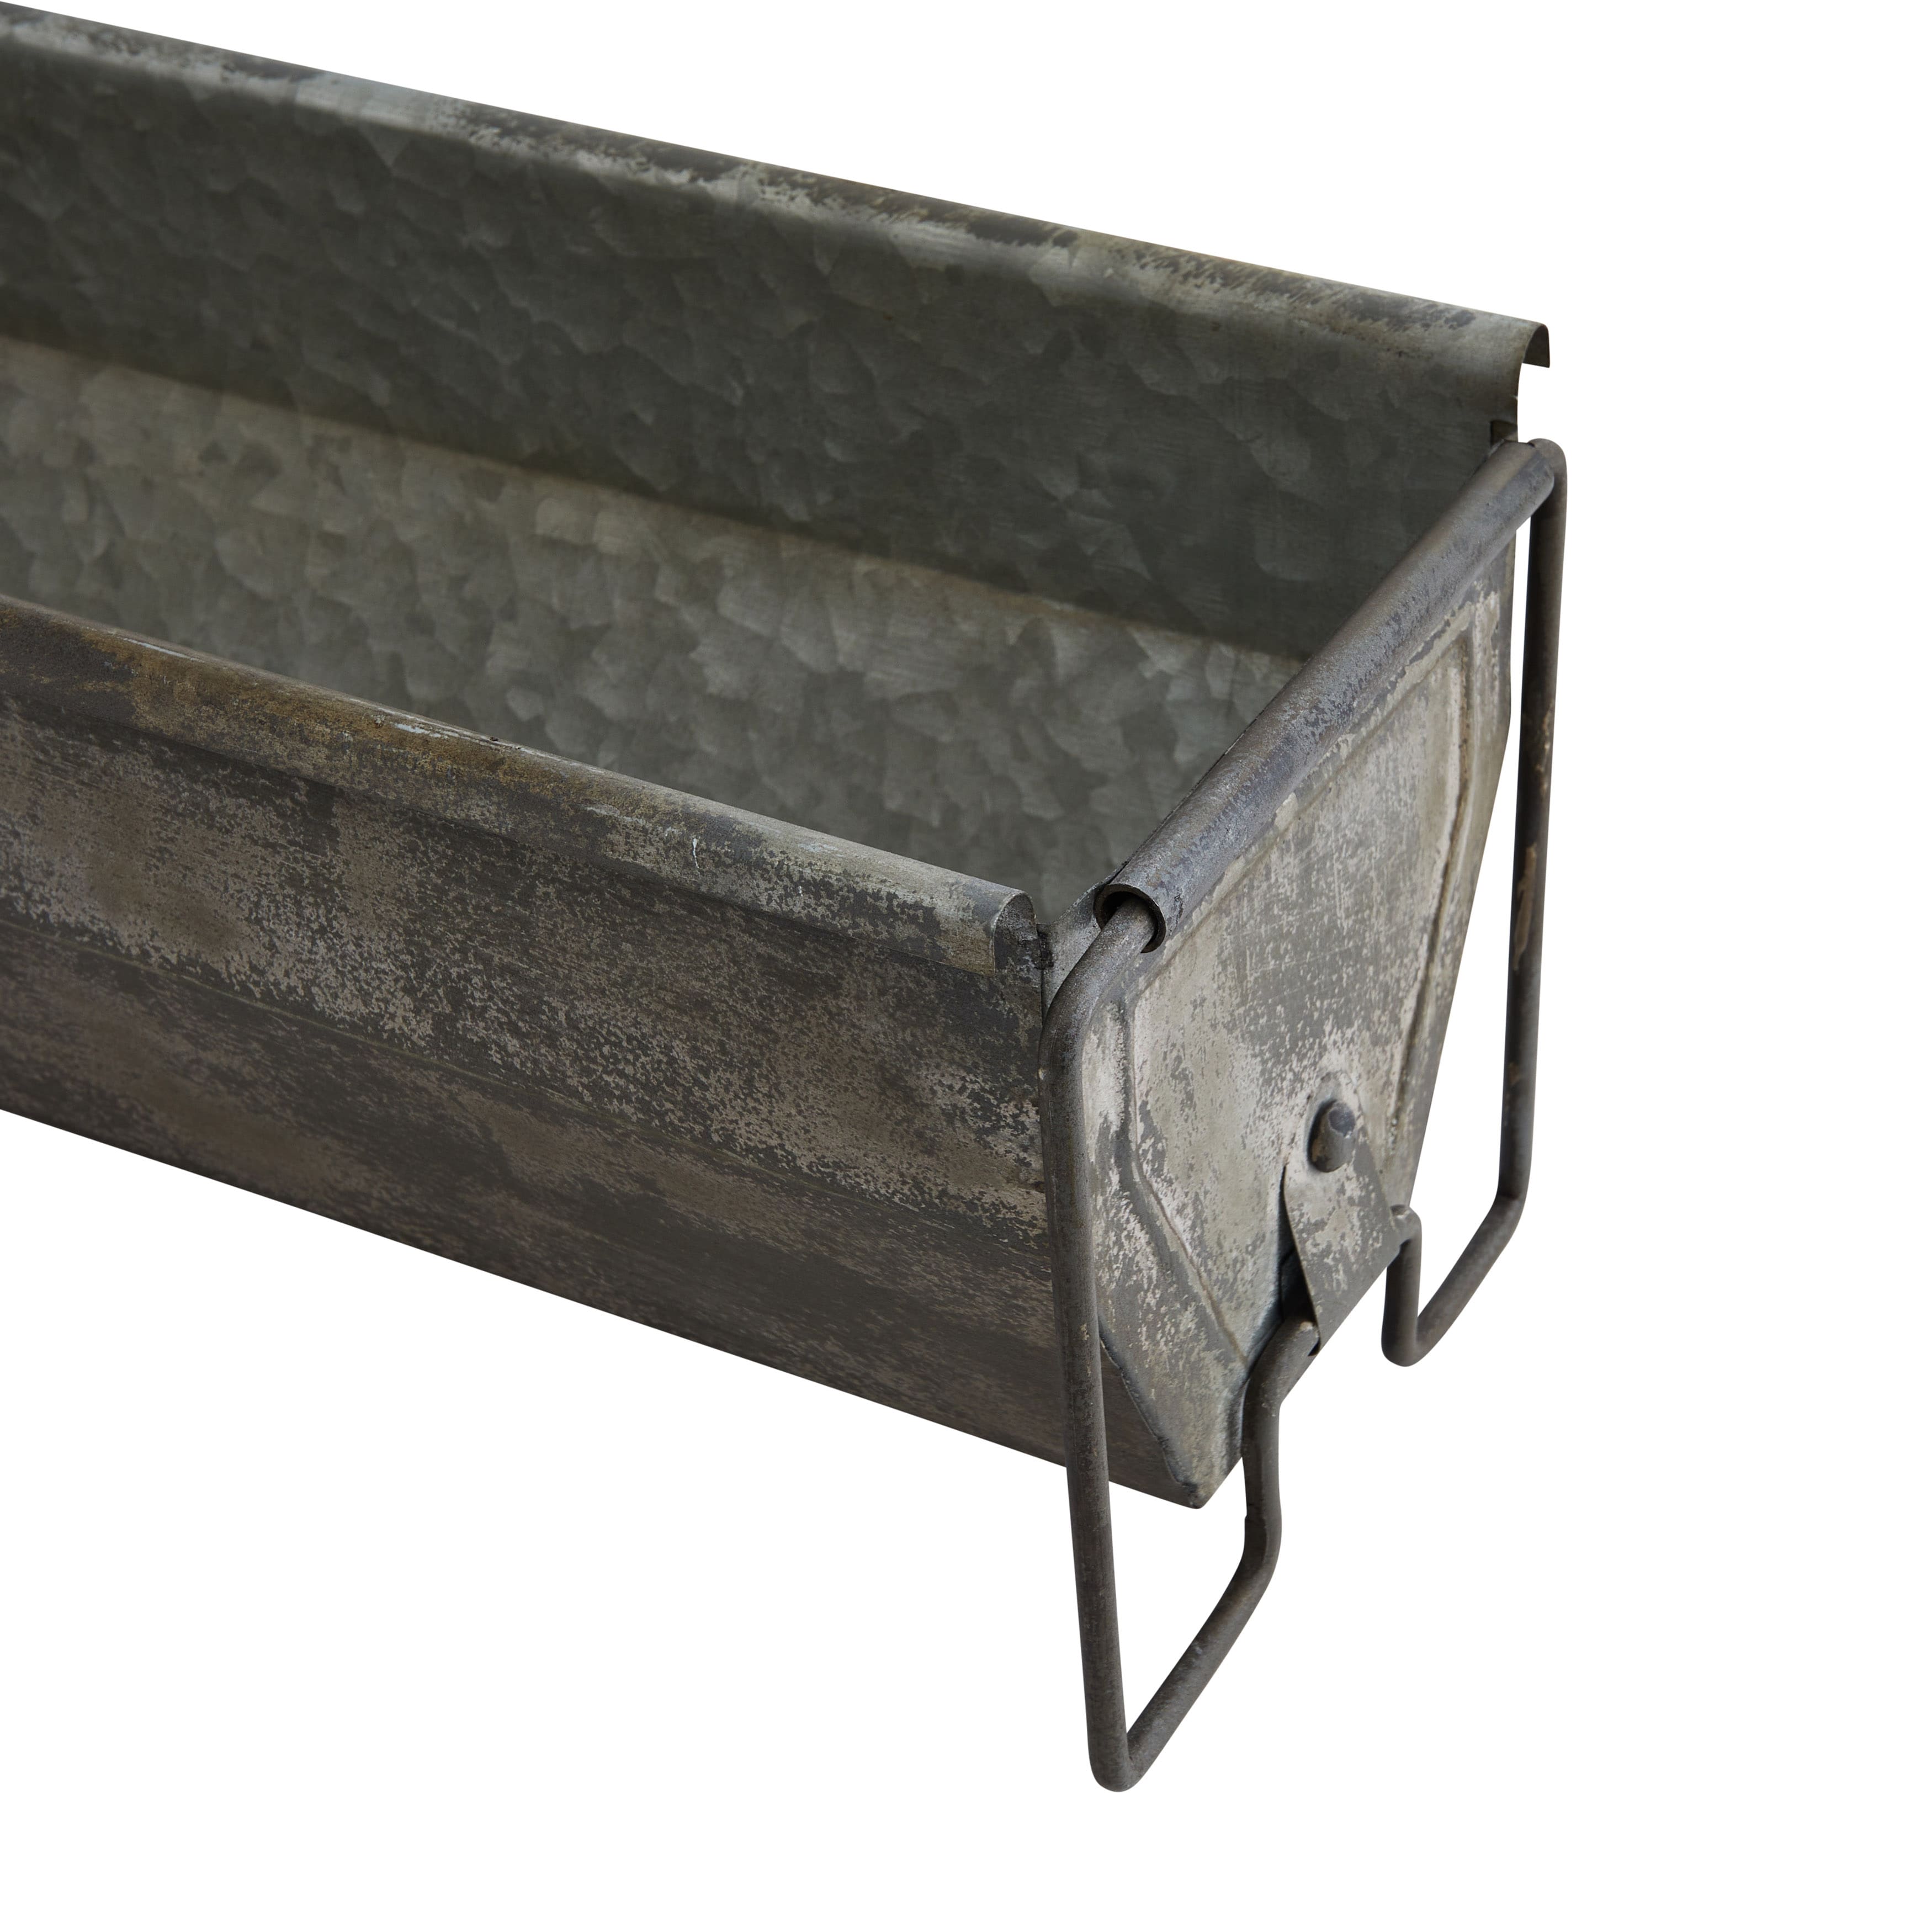 Distressed Metal Trough Container